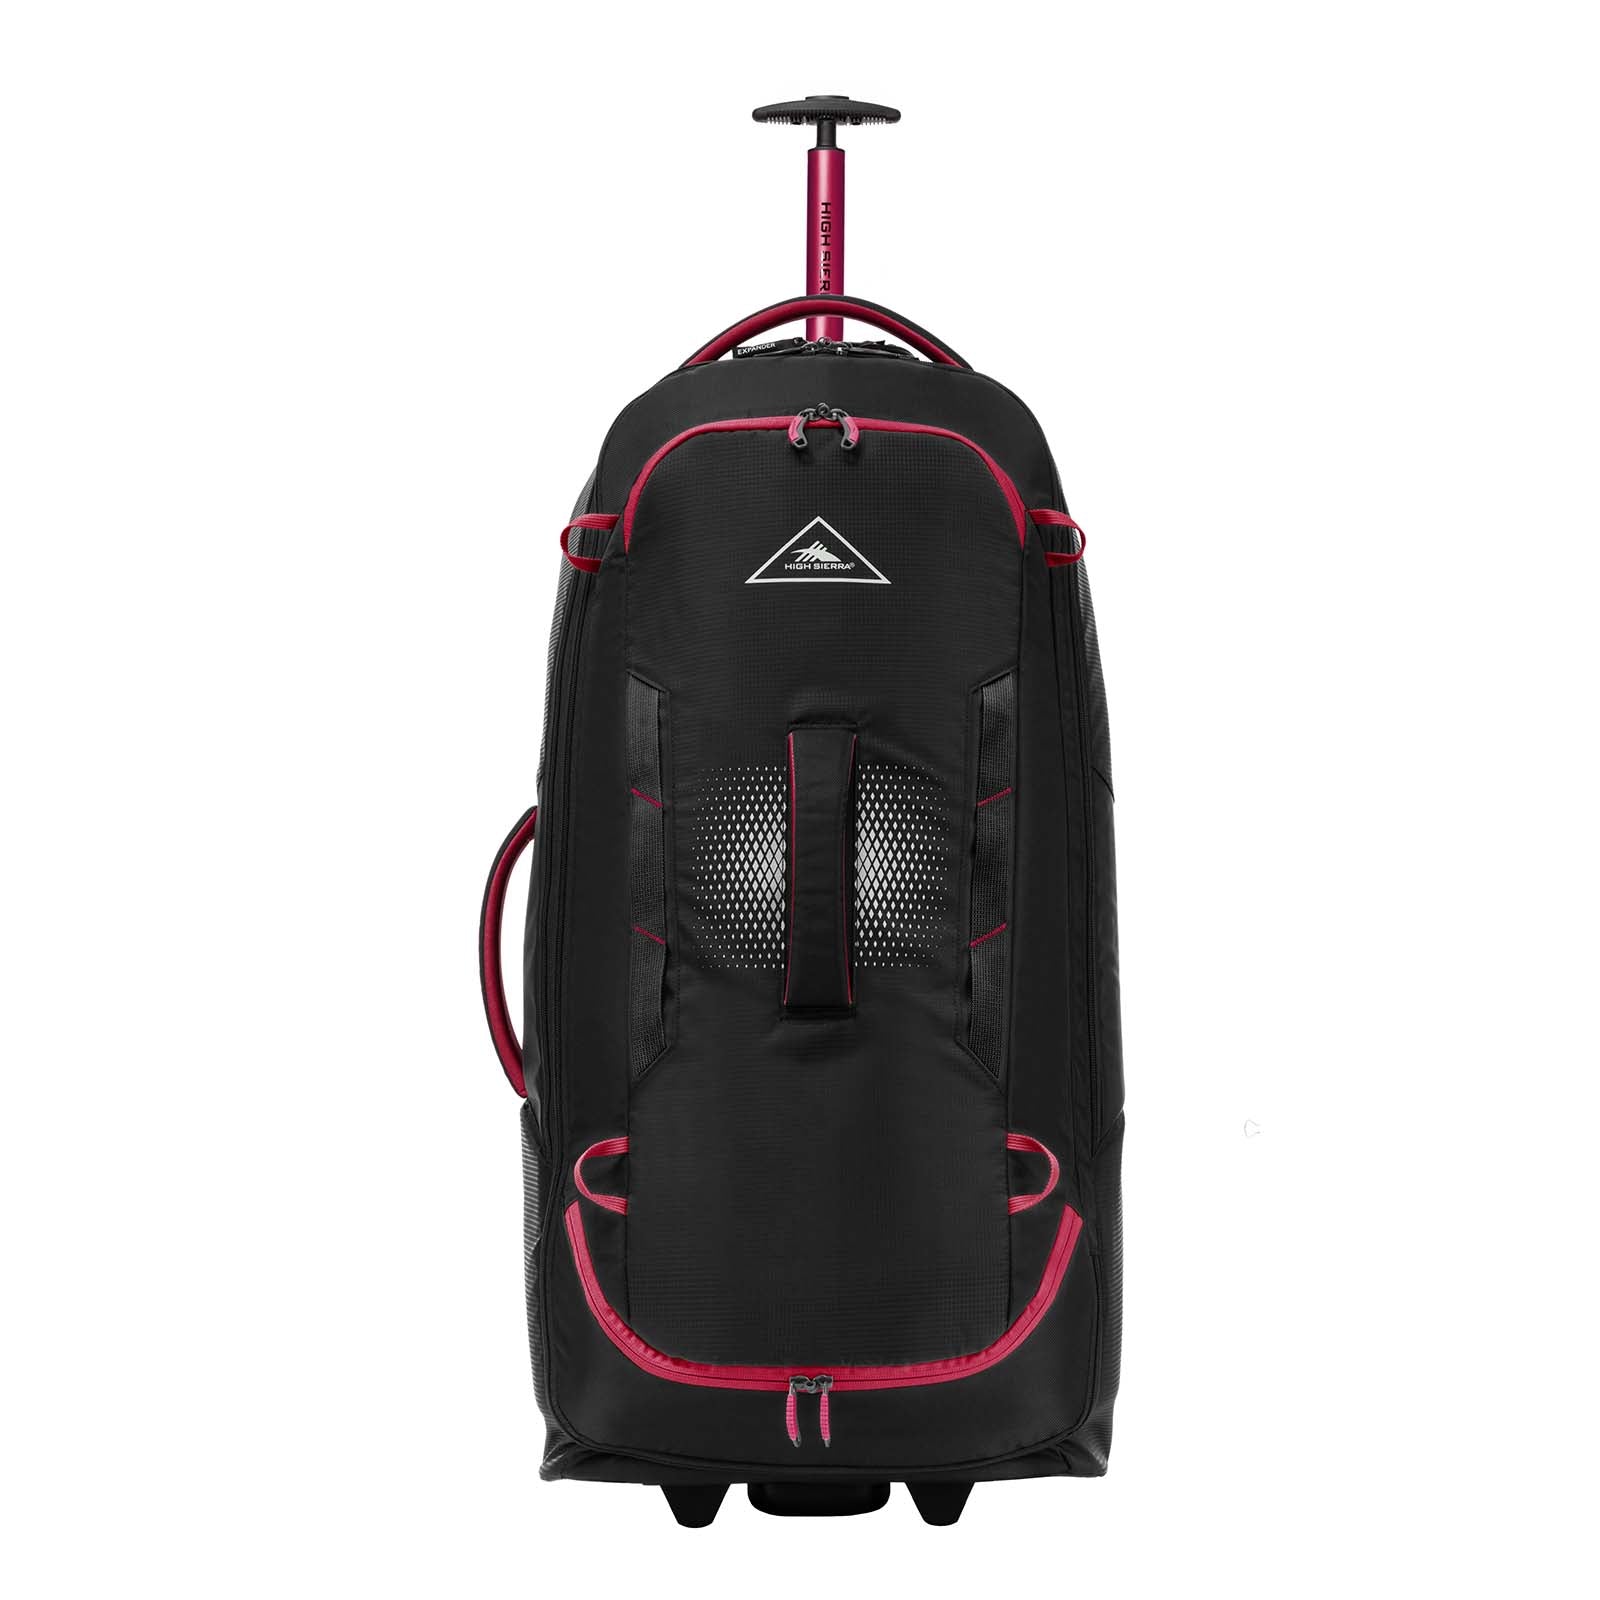    High_Sierra_Composite_V4_84cm_Carry-On_Wheeled_Duffel_Black_Red_Face